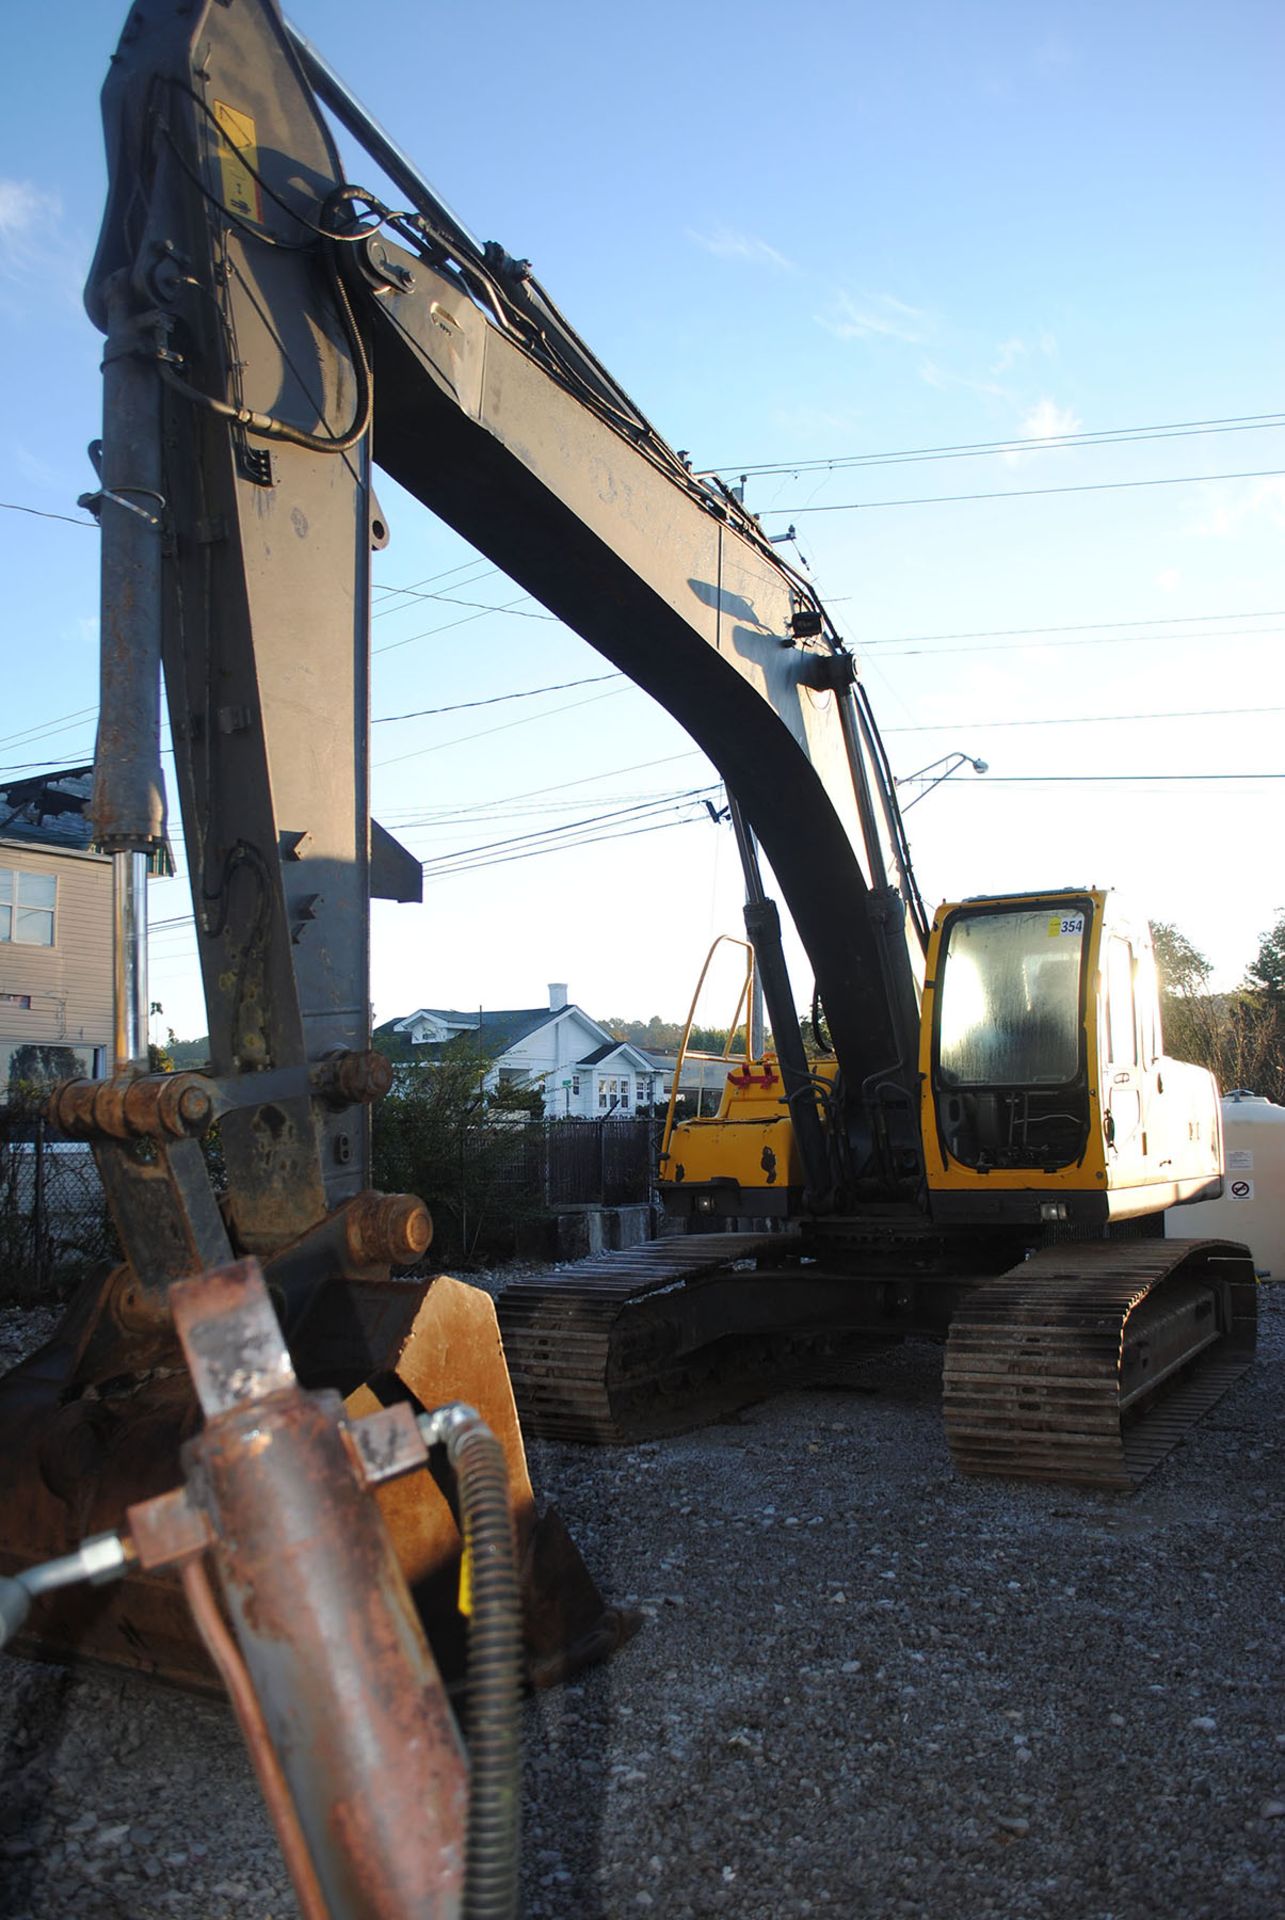 2001 VOLVO E290LC HYDRAULIC EXCAVATOR; PIN EC2906LCC-03657, 10,500 COUNTERWEIGHT, ENCLOSED CAB - Image 2 of 6